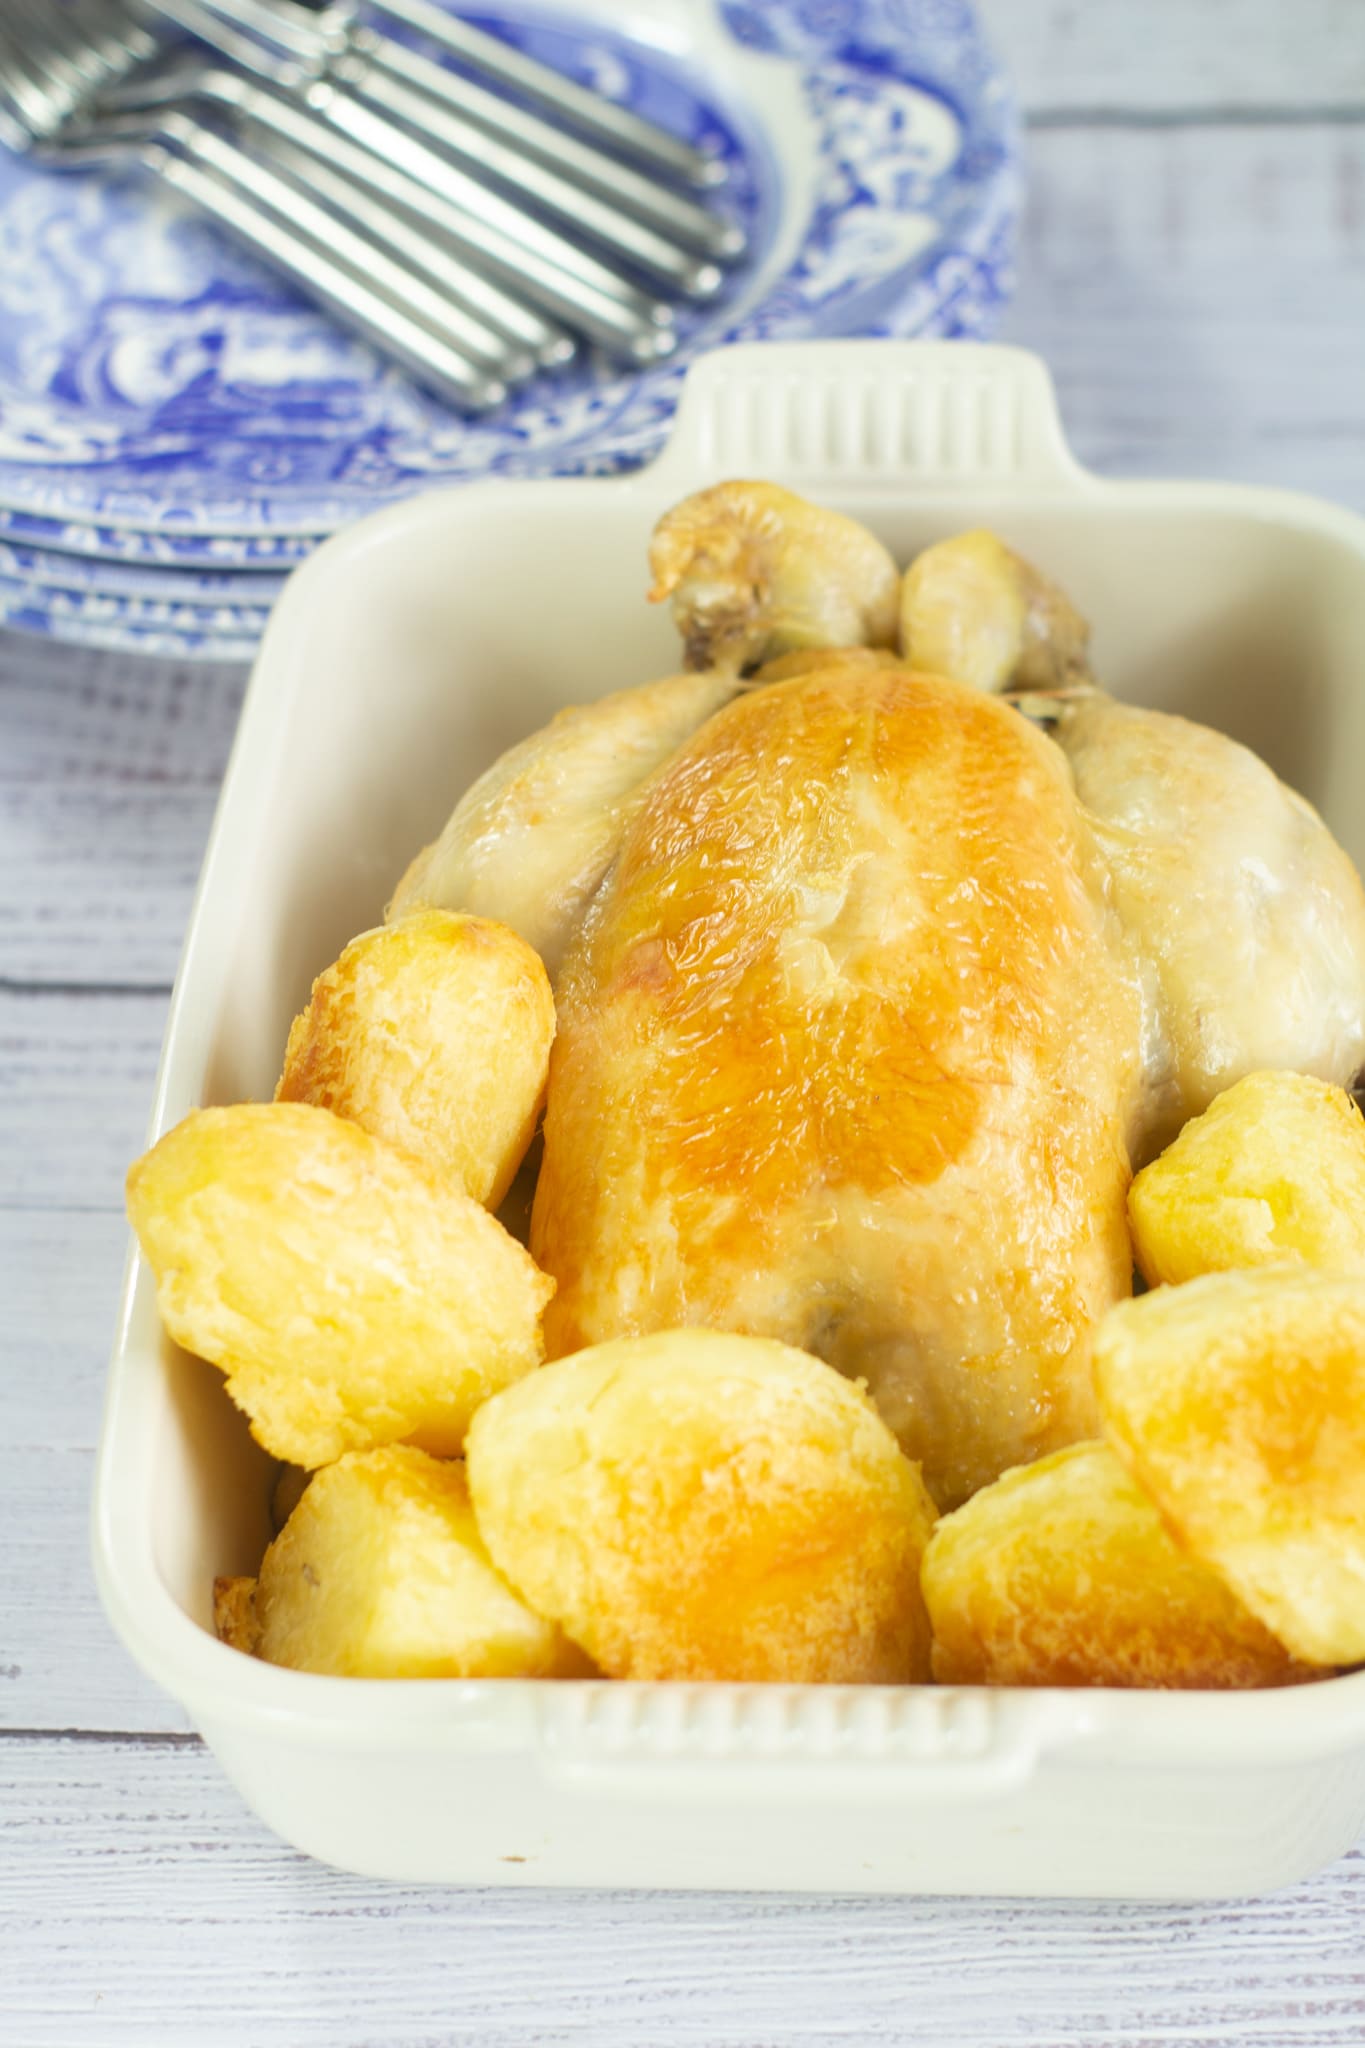 roast chicken in a serving dish with roast potatoes and blue and white plates in the background